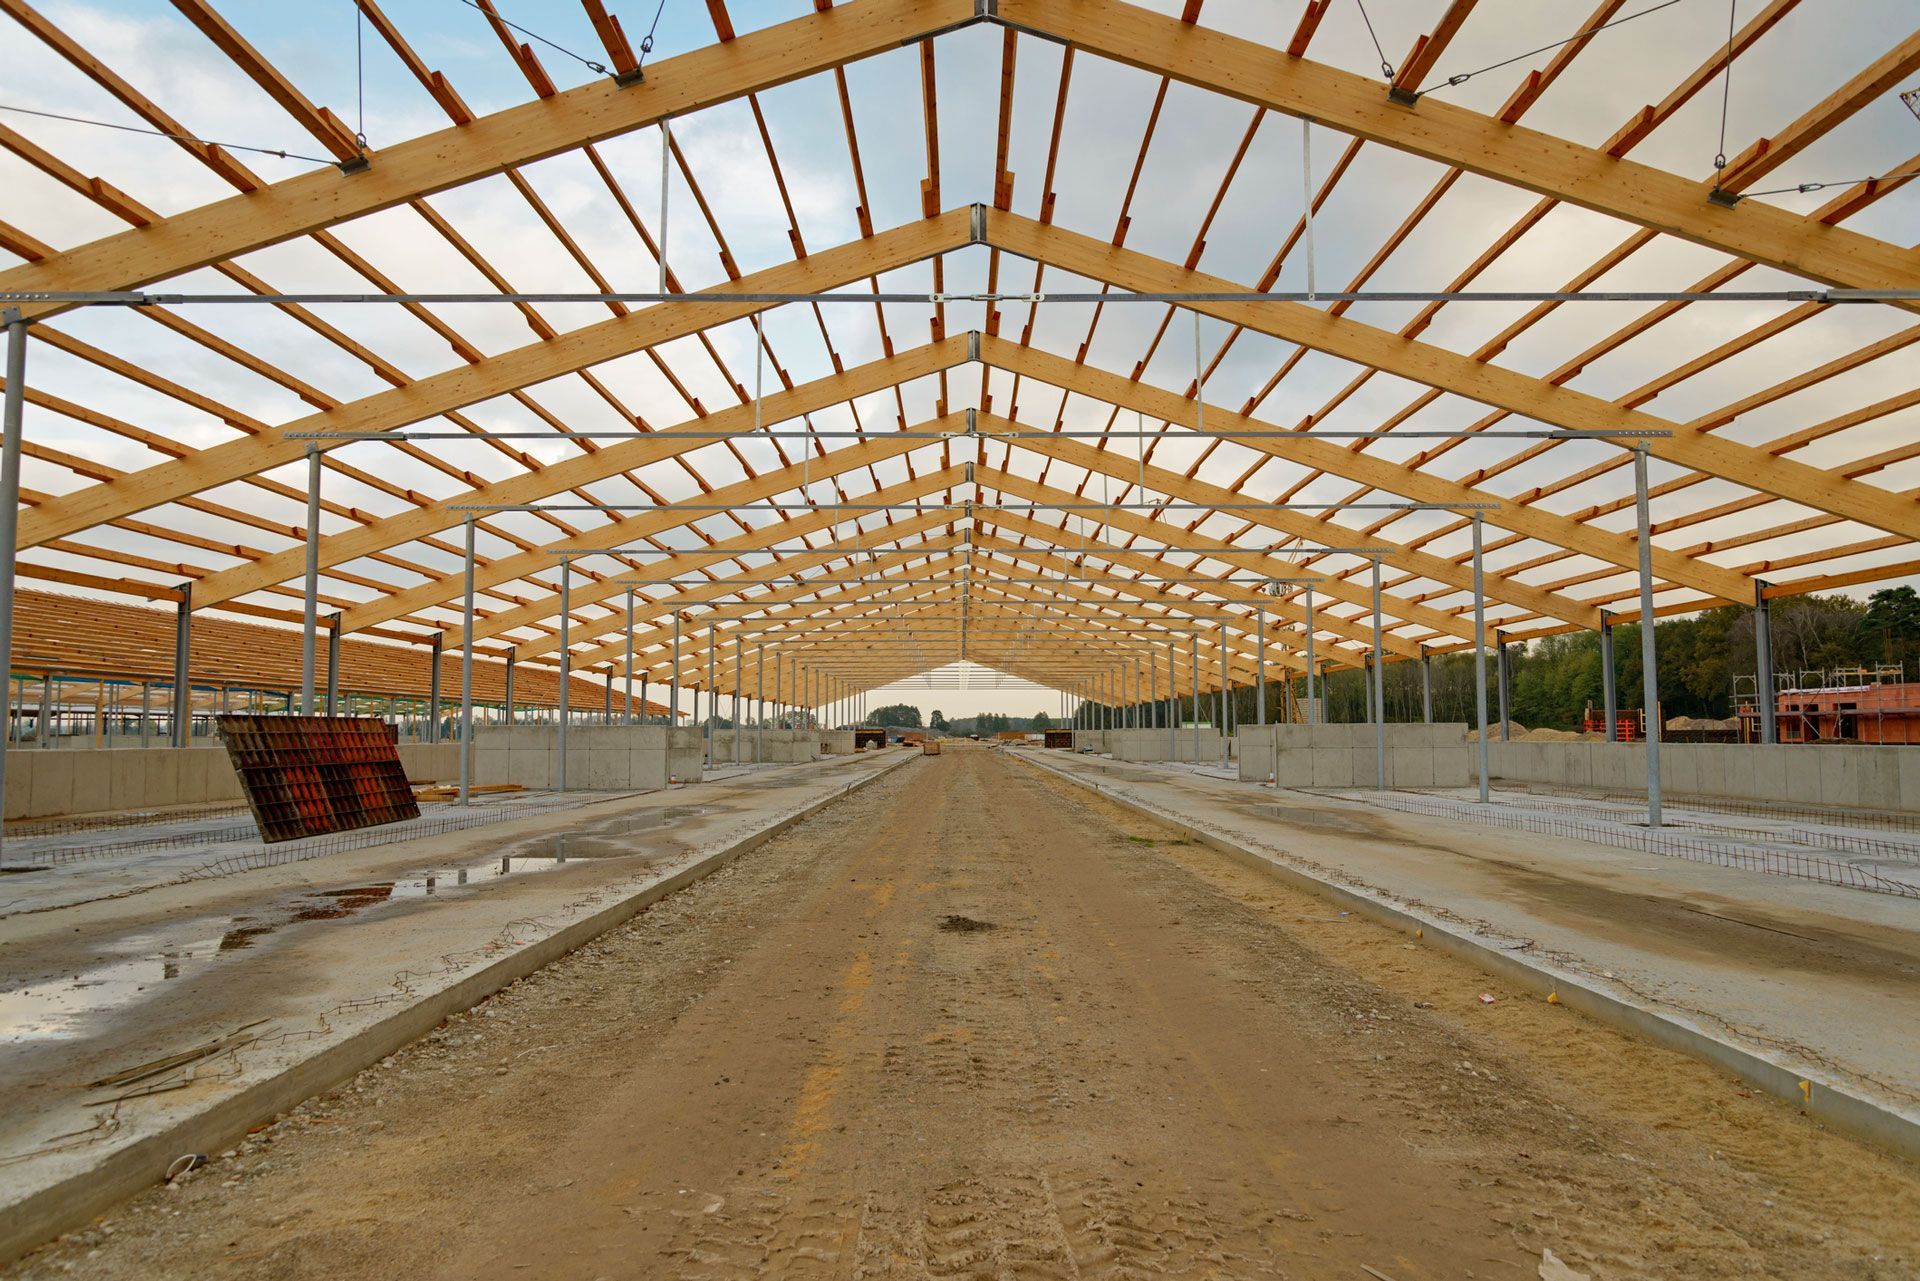 A large building under construction with a wooden roof